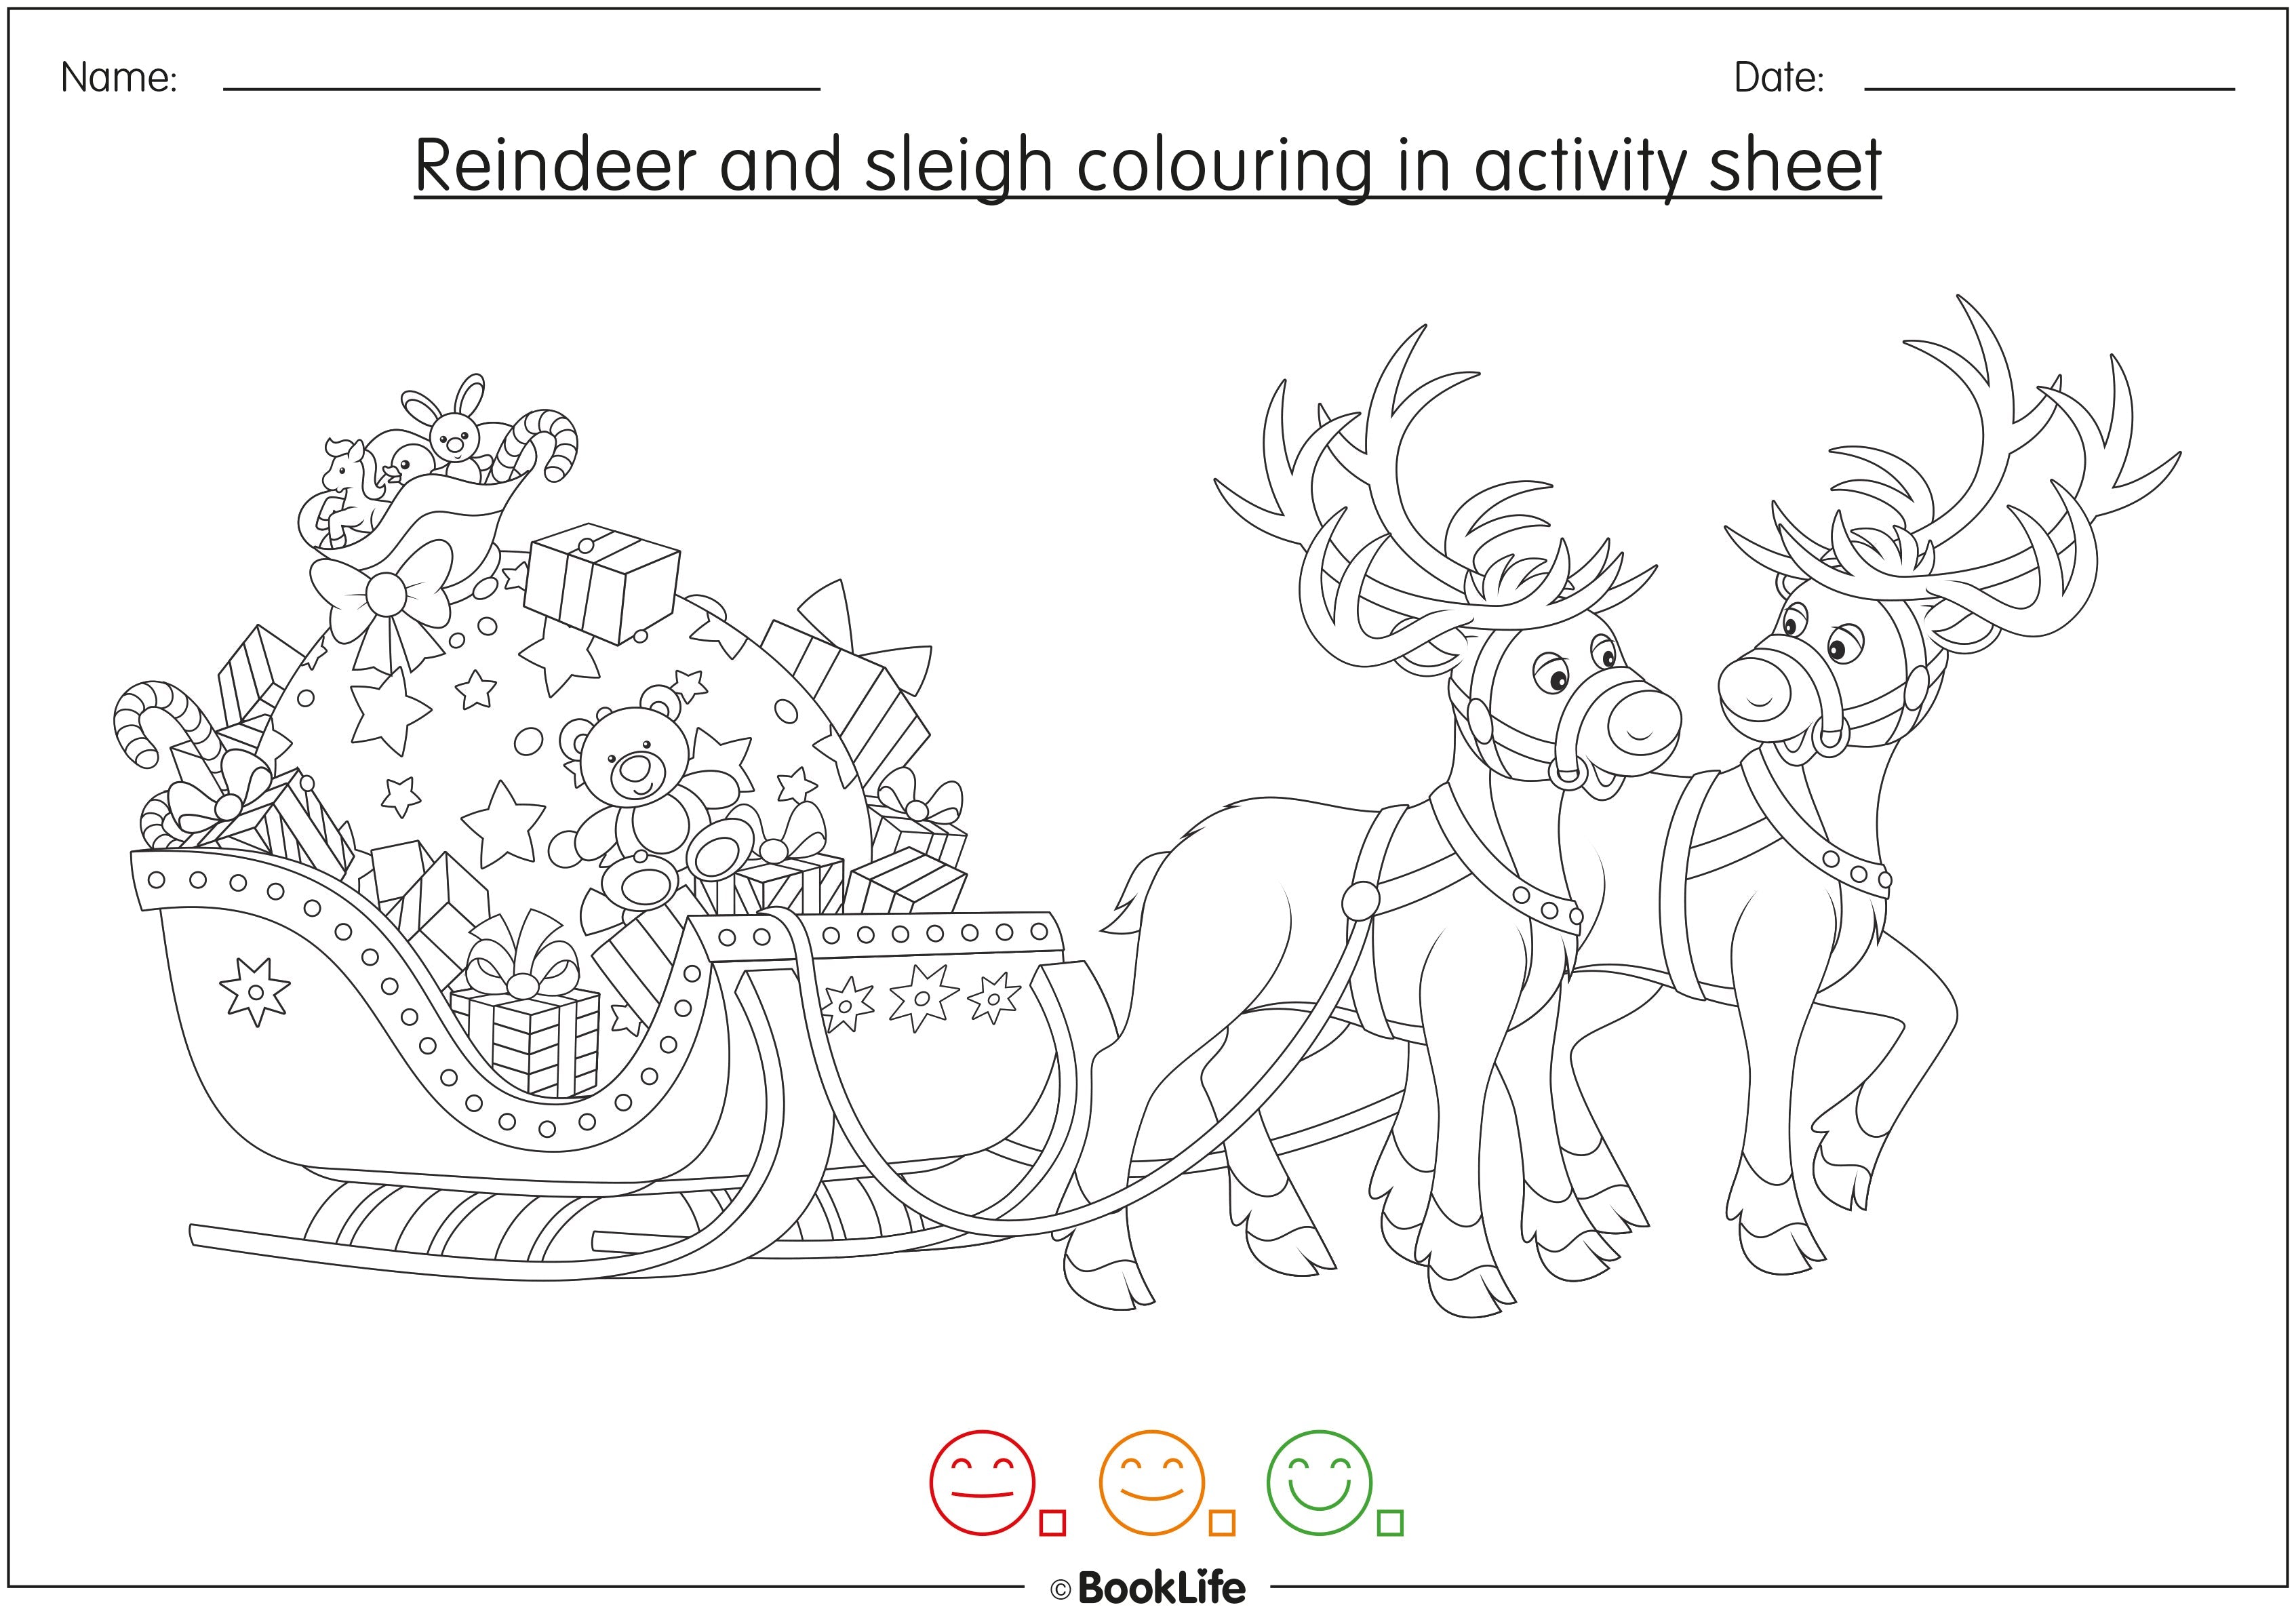 Reindeer and Sleigh Colouring in Activity Sheet by BookLife